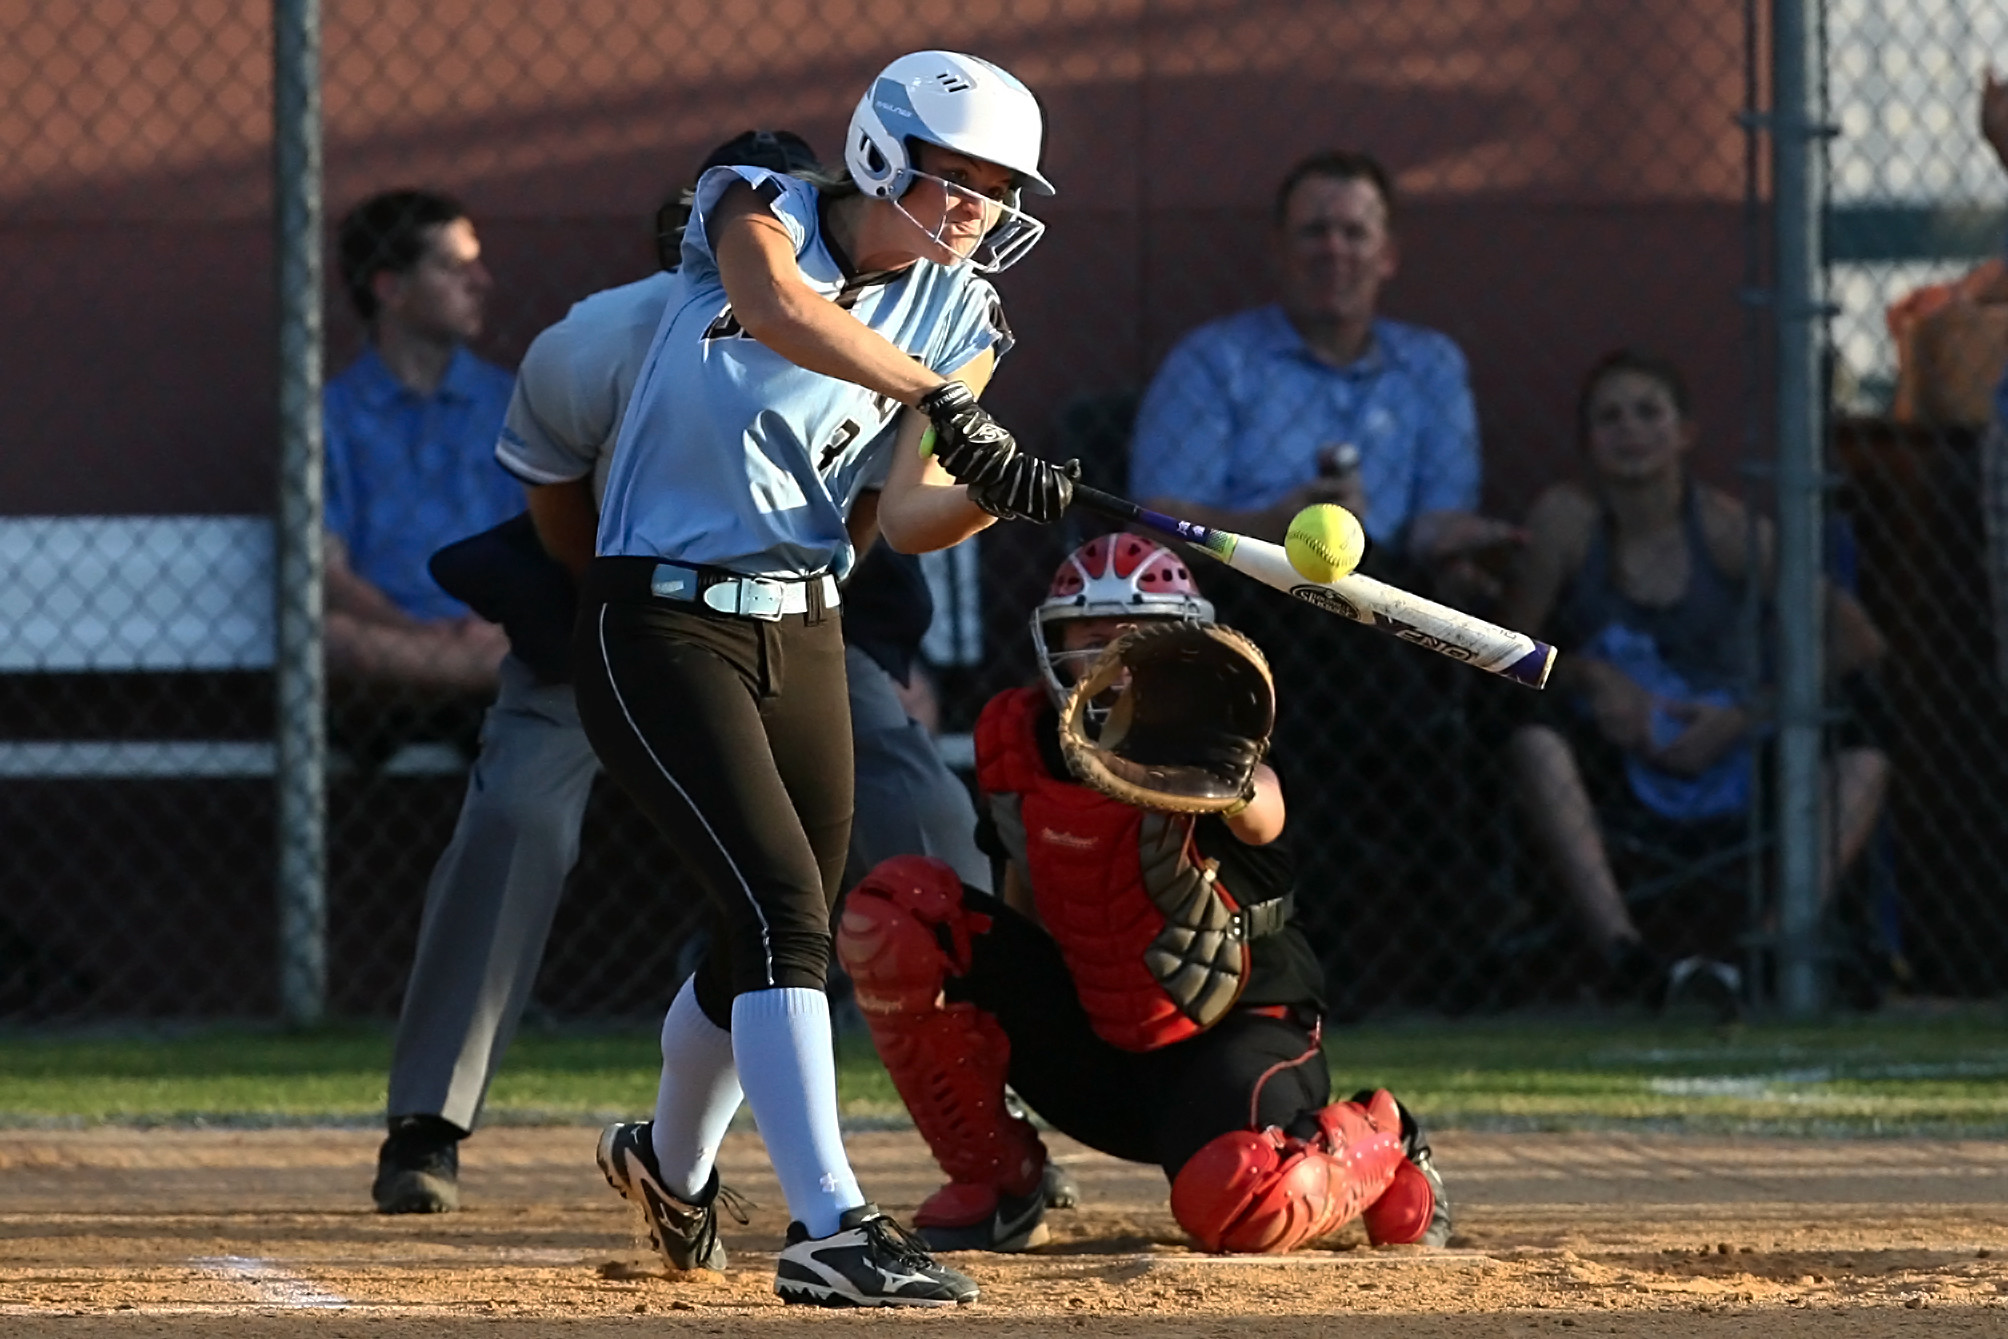 #3 Quinlan Richmond lines a base hit to drive in a run for the Sharks against Parker